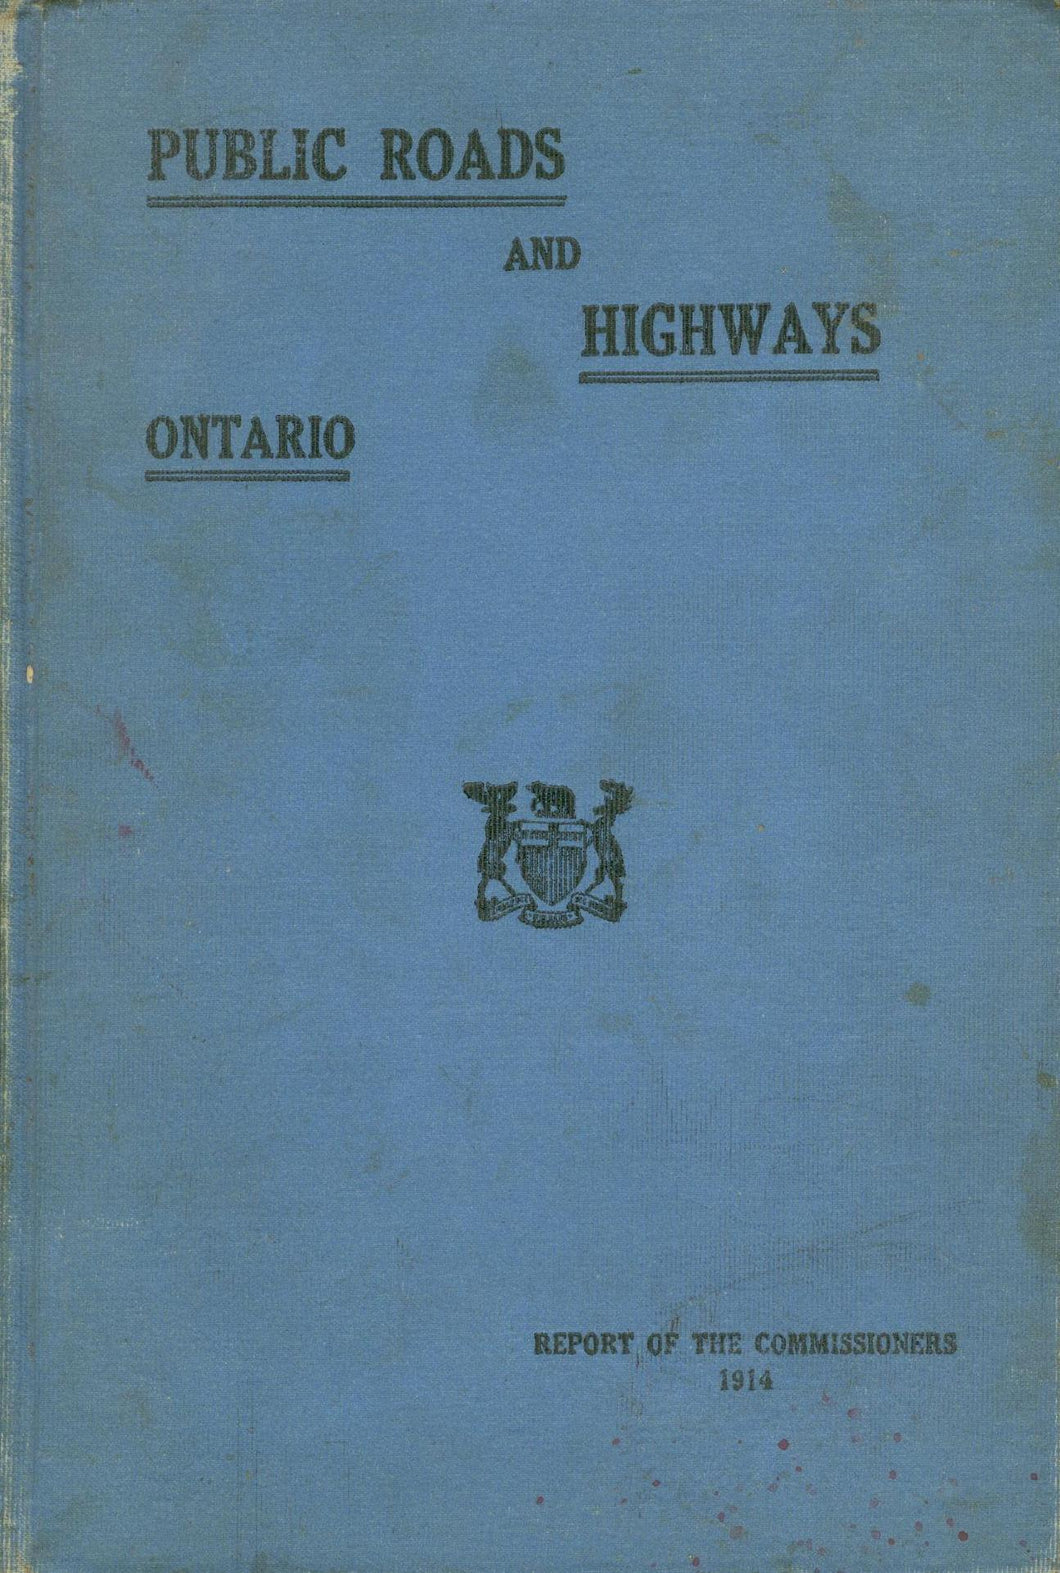 Report of the Public Roads and Highways Commission of Ontario 1914